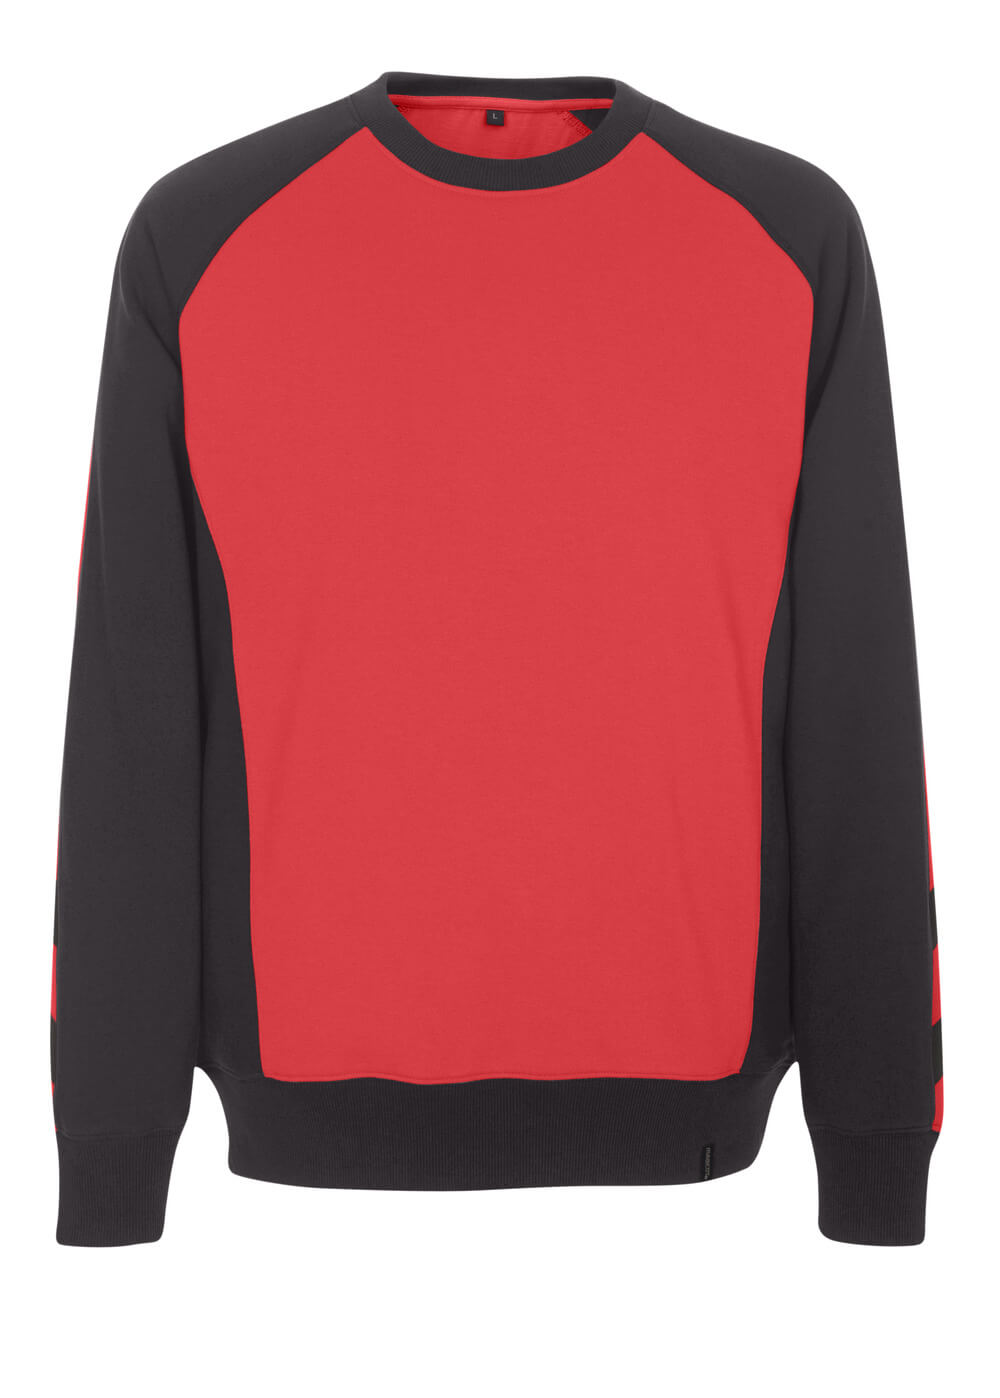 WITTAND SWEATER, RED/BLACK, 60%OTTON/40%OLYESTER, MASCOT UNIQUE